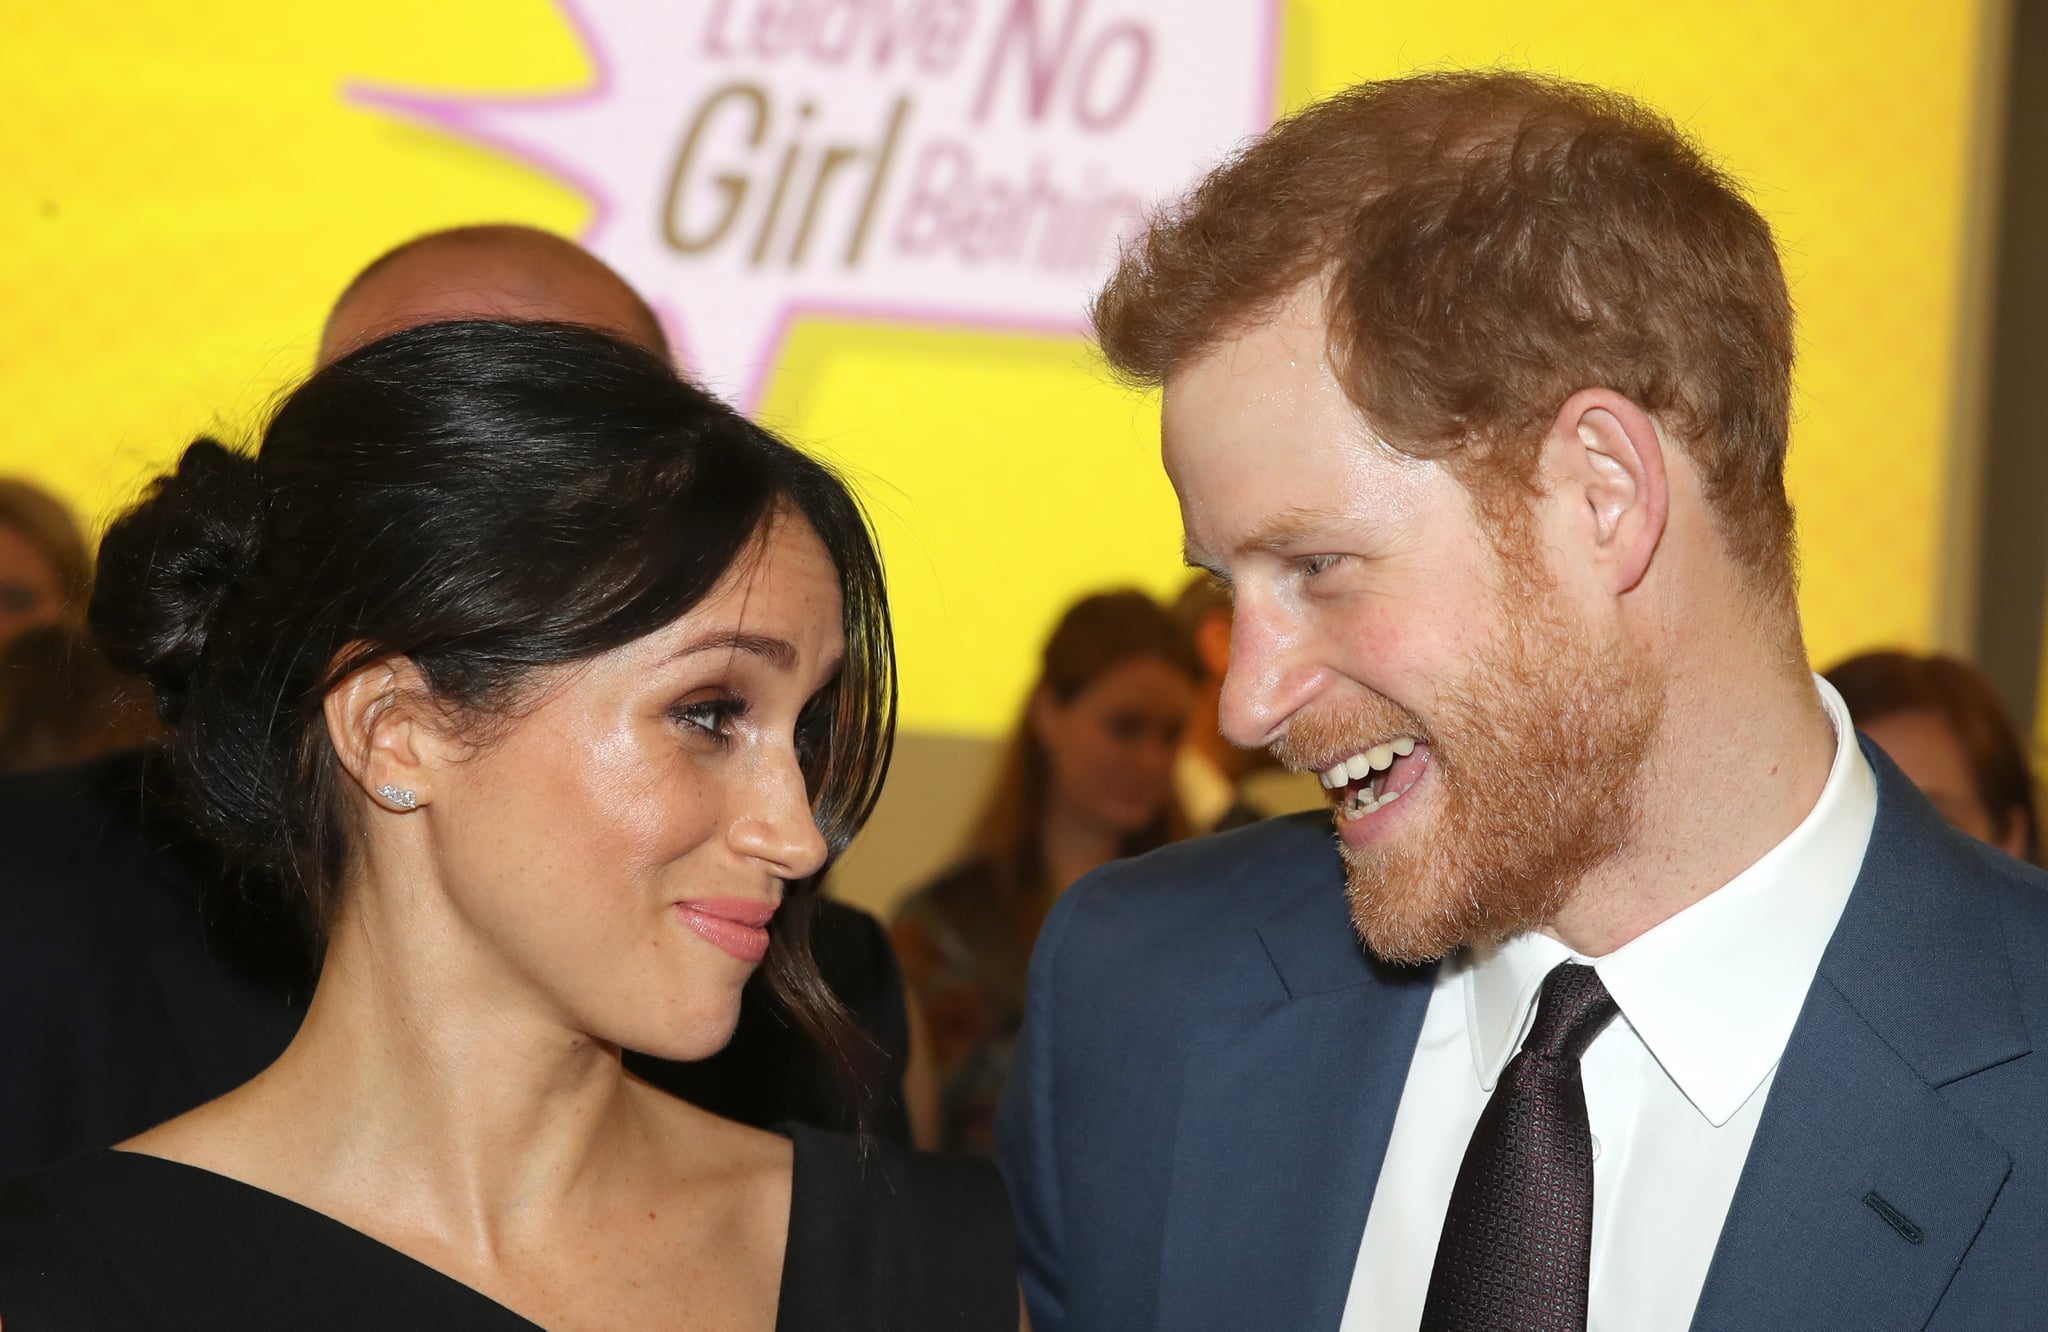 LONDON, ENGLAND - APRIL 19:  Meghan Markle and Prince Harry attend the Women's Empowerment reception hosted by Foreign Secretary Boris Johnson during the Commonwealth Heads of Government Meeting at the Royal Aeronautical Society on April 19, 2018 in London, England.  (Photo by Chris Jackson - WPA Pool/Getty Images)